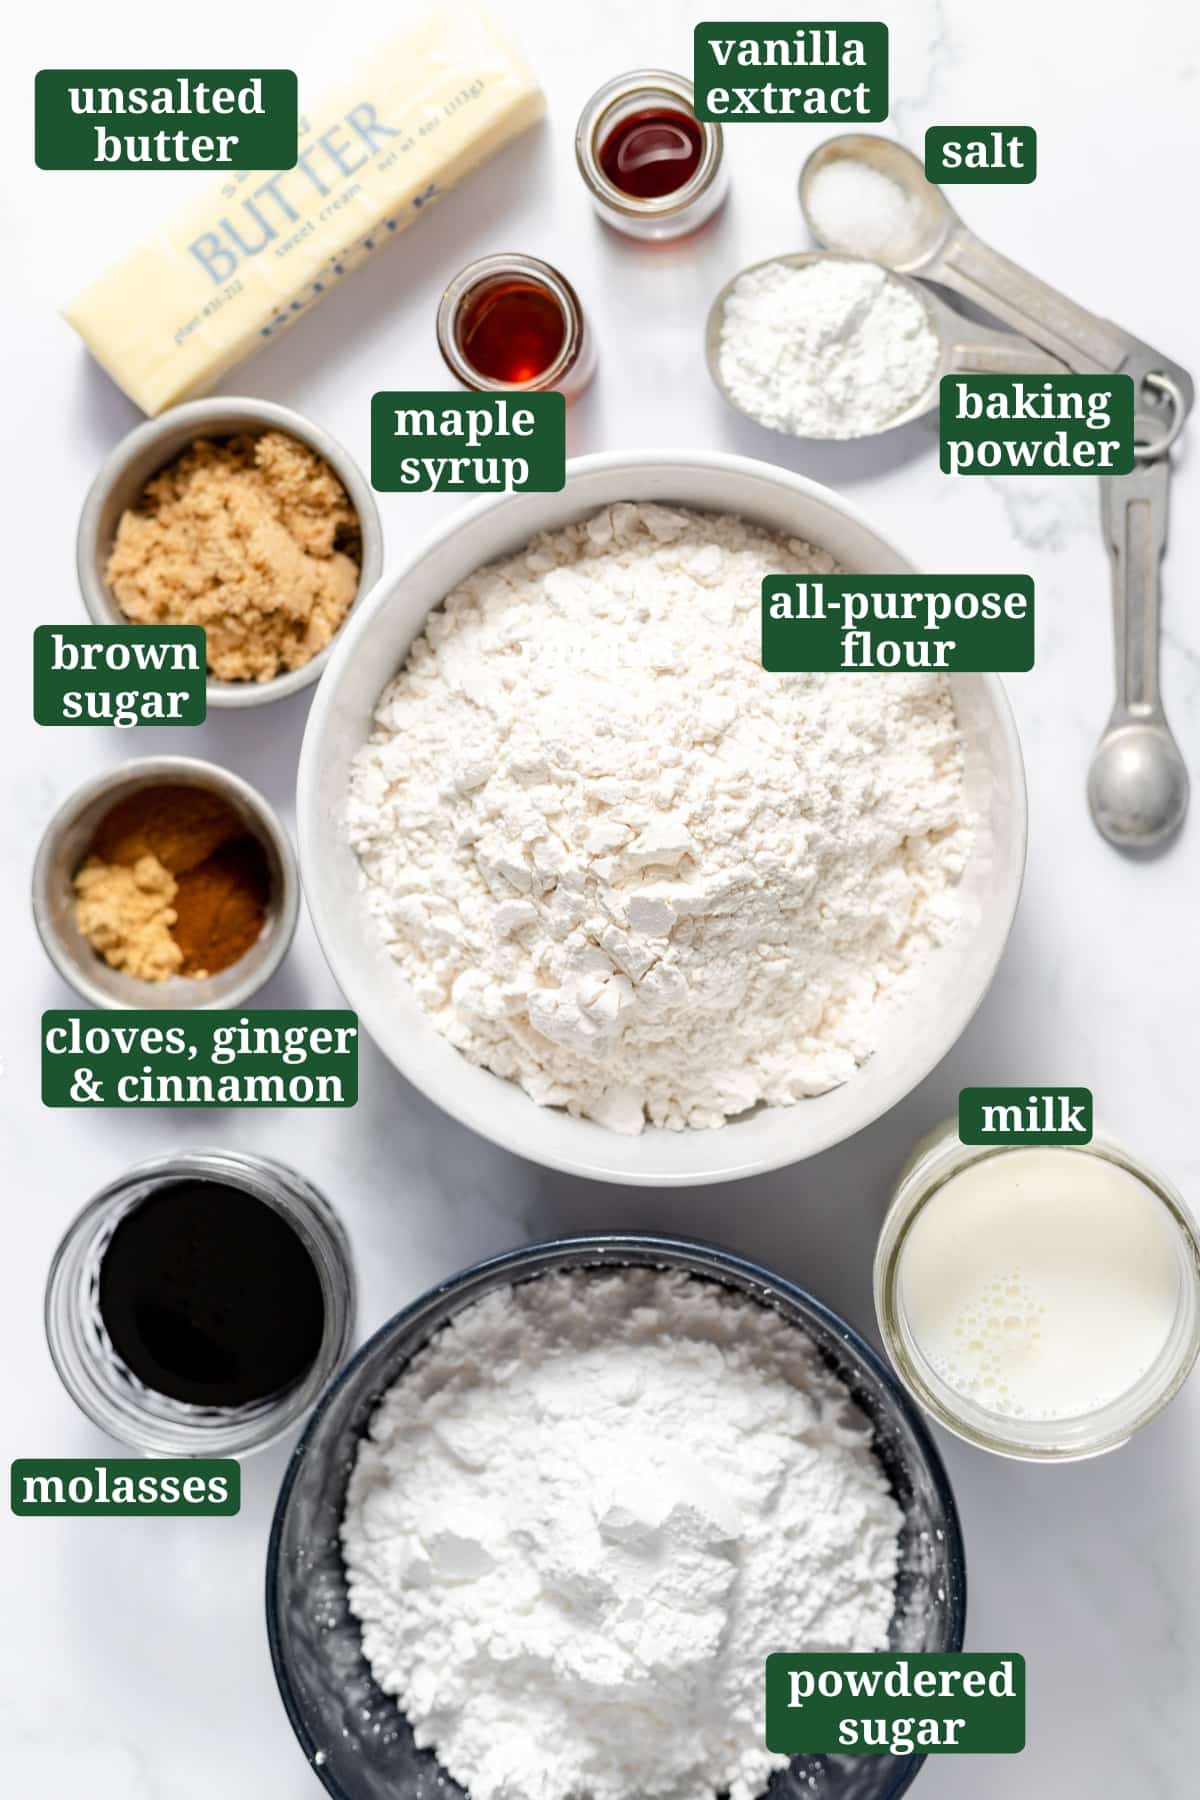 Ingredients in small bowls to make gingerbread scones, including flour, powdered sugar, brown sugar, molasses, cinnamon, cloves, ginger, baking powder, salt, vanilla, and butter with text overlays over each ingredient.